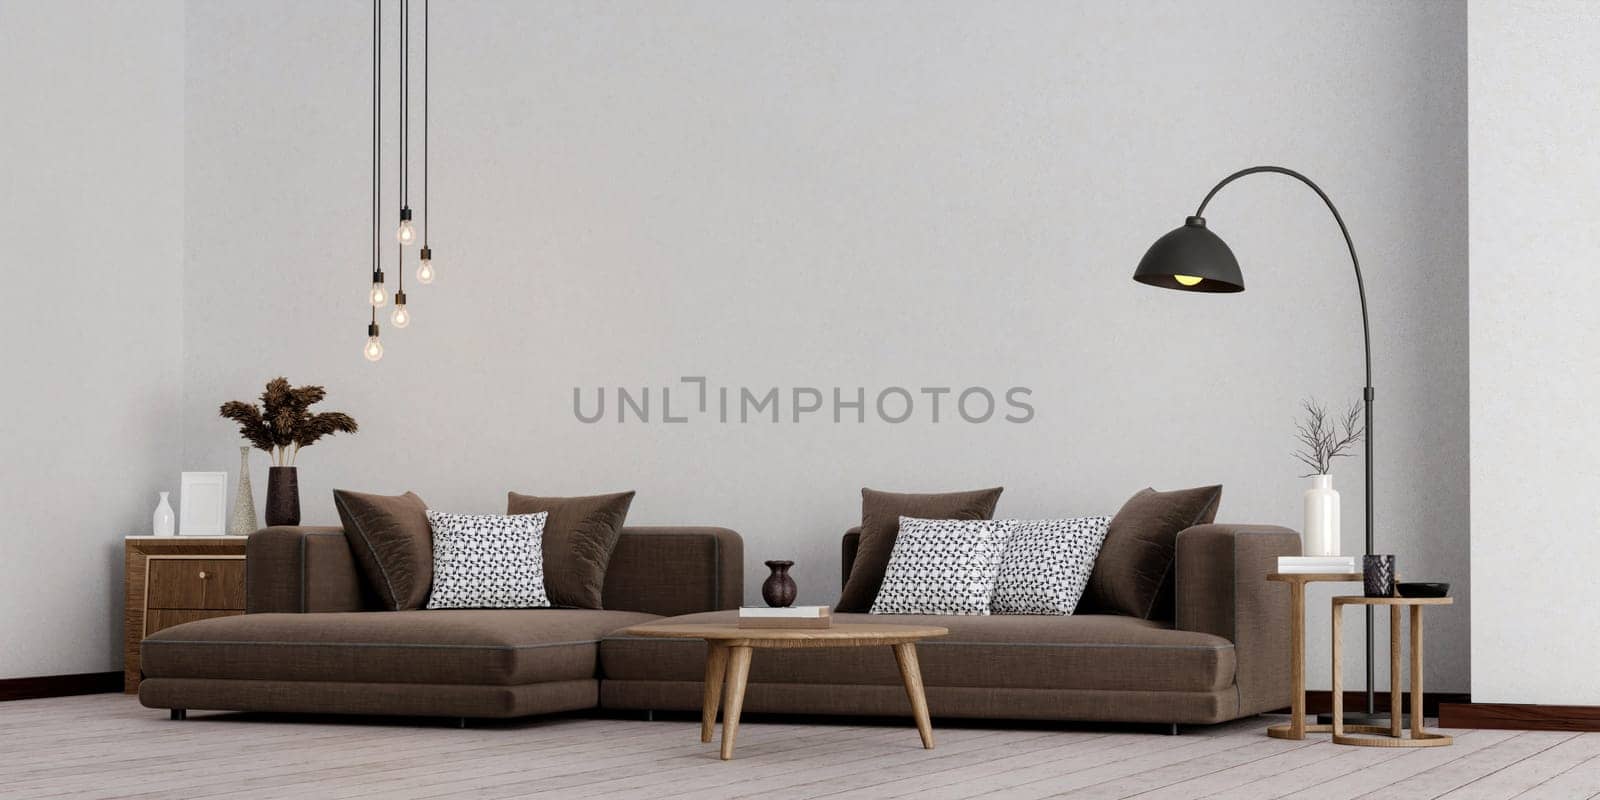 Modern living room .3d rendering image. There are wooden floor decorate wall .with brown fabric furniture..